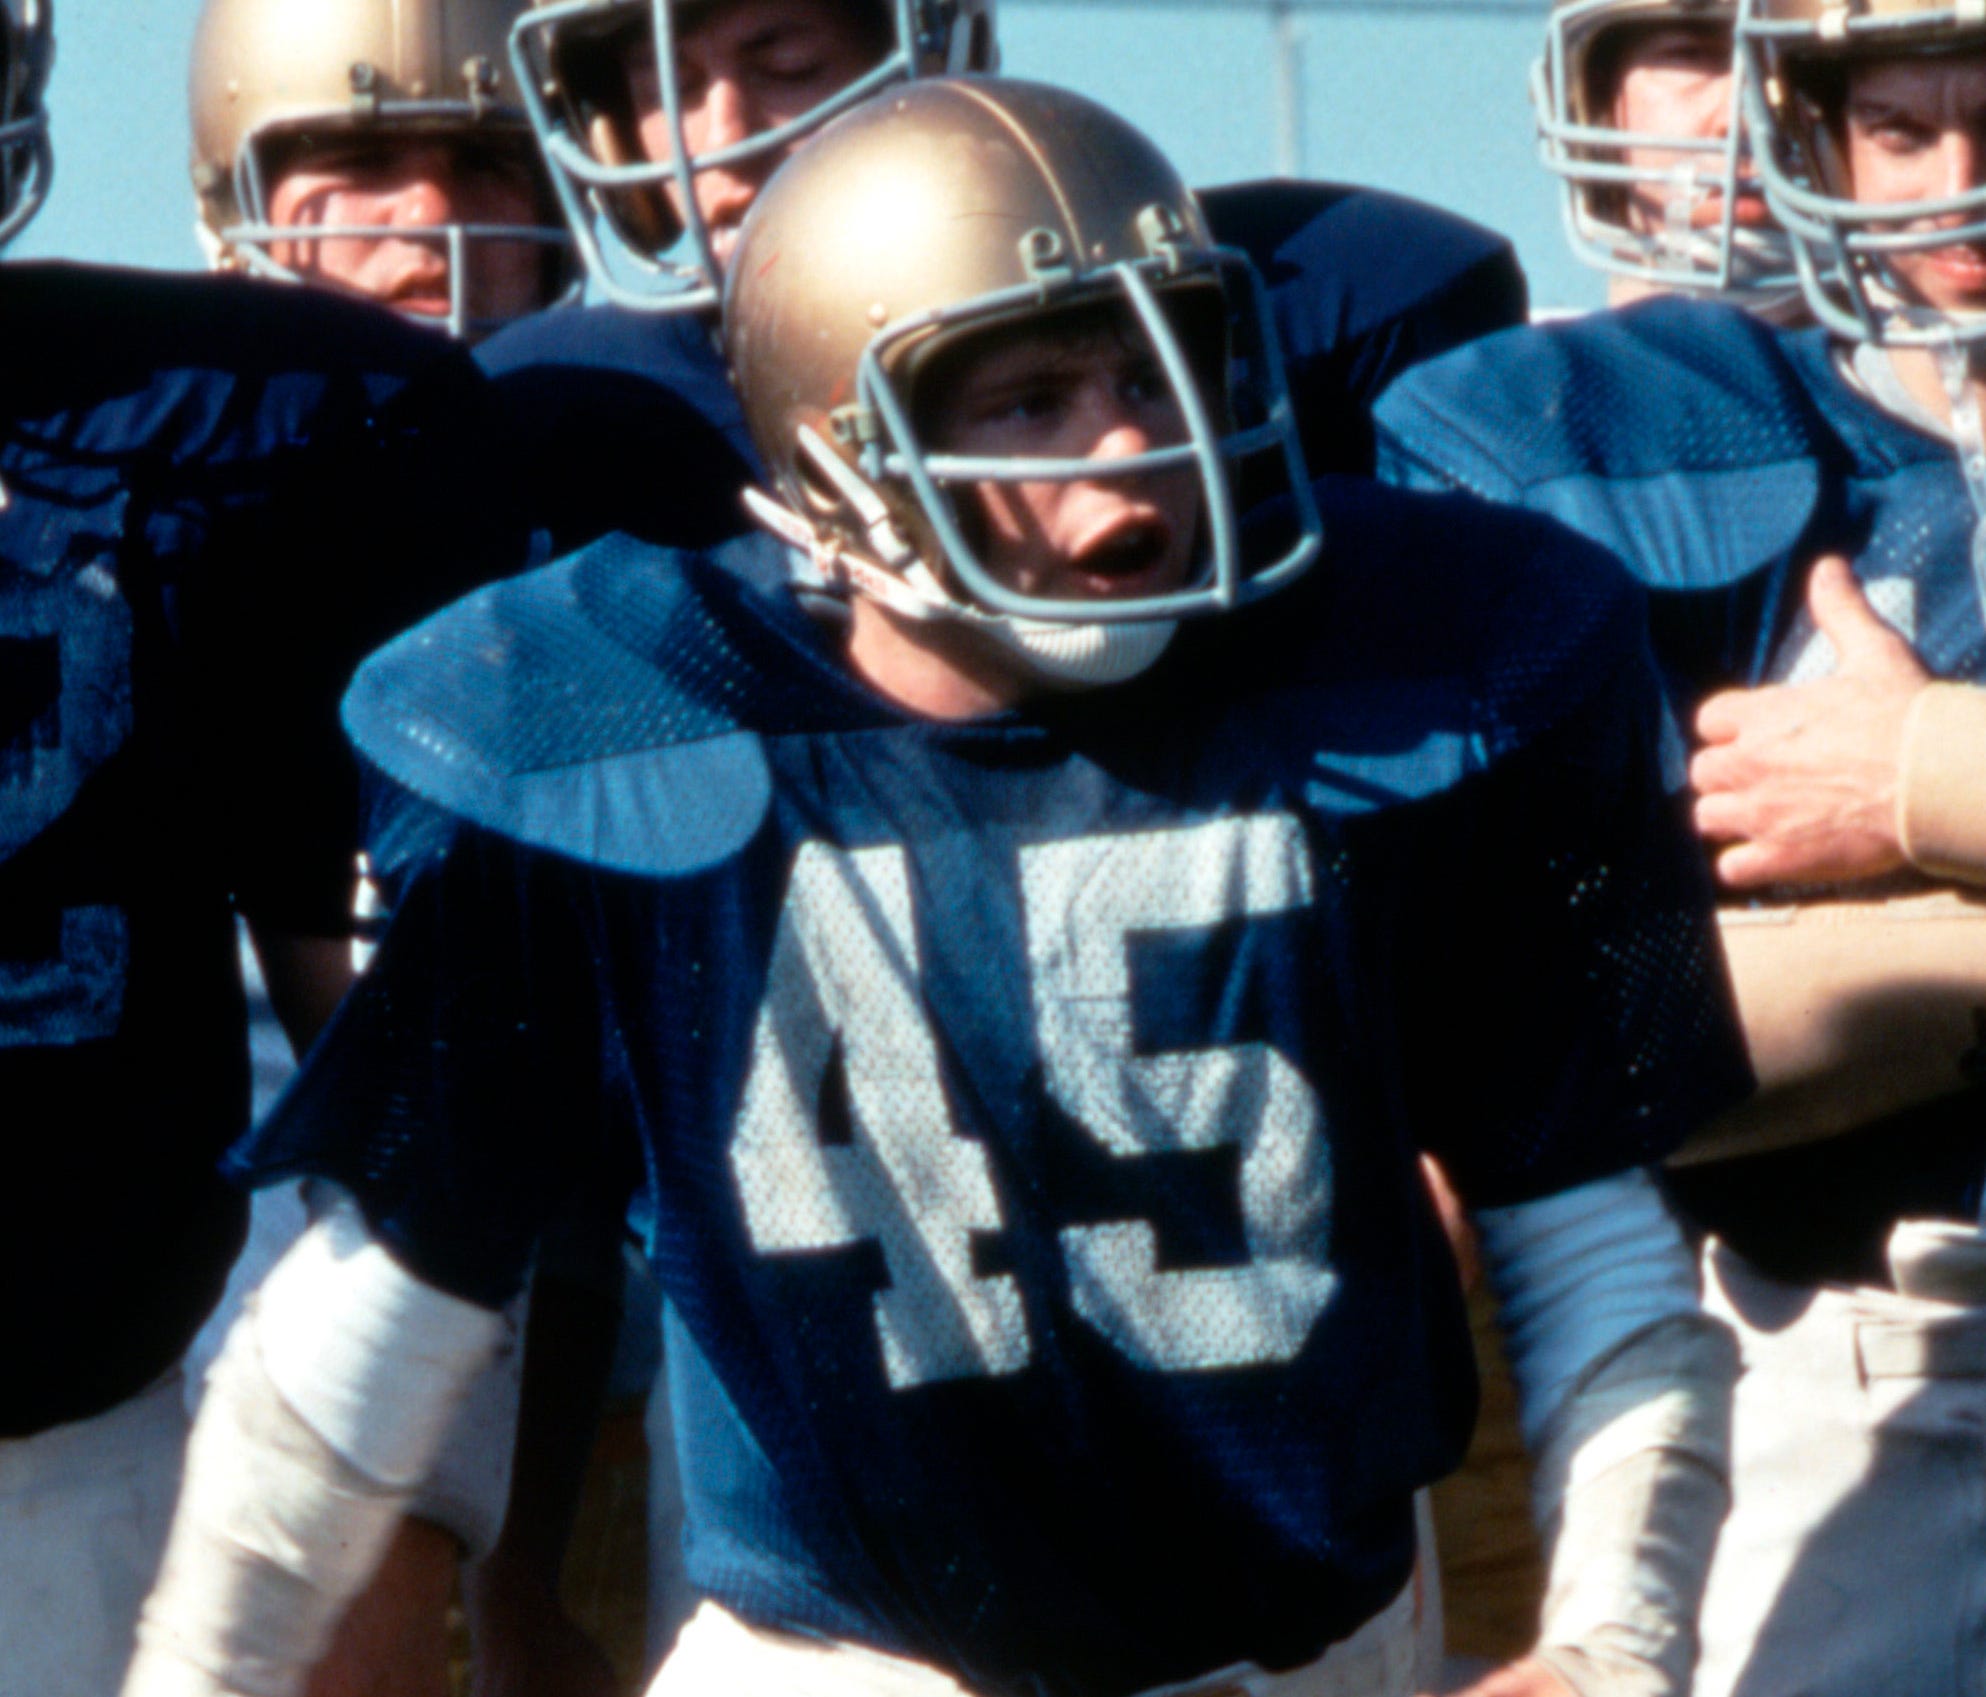 Actor Sean Astin portrayed Notre Dame football player Rudy Ruettiger in the movie 